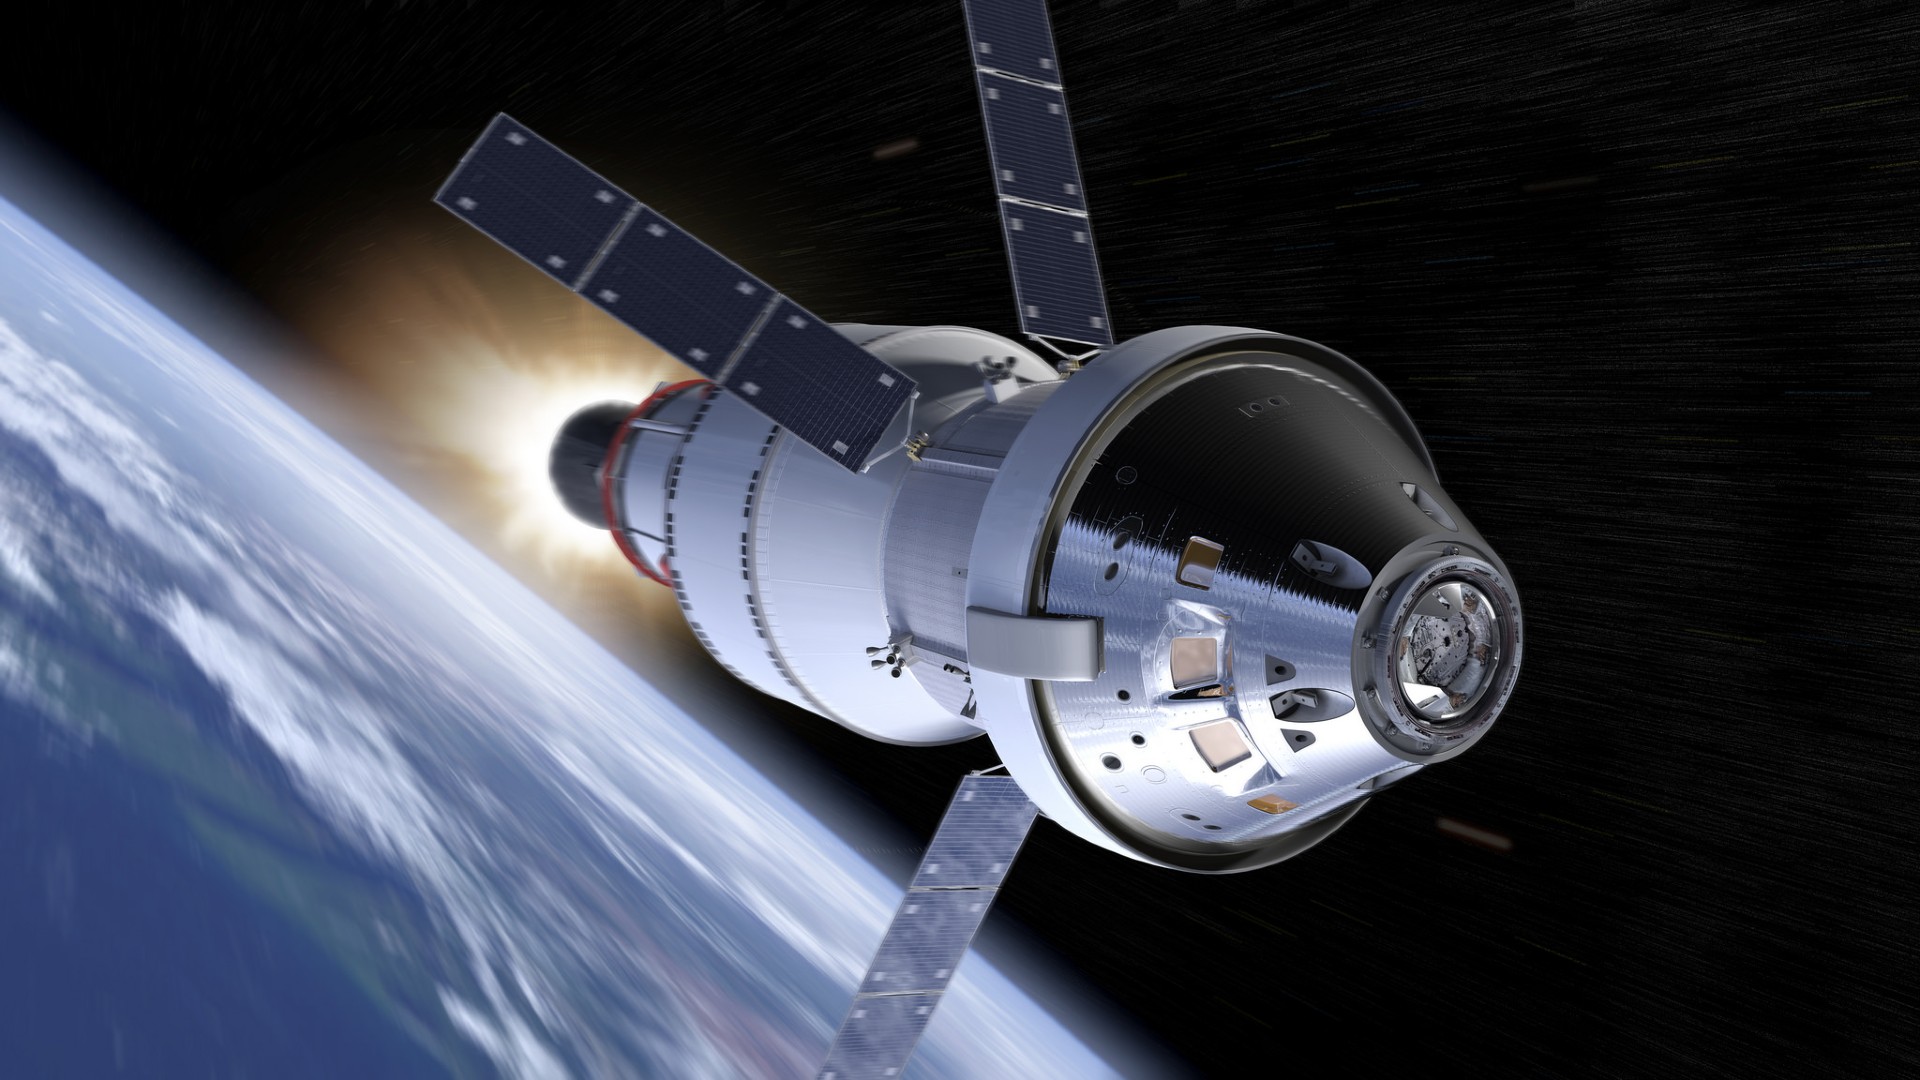 orion spacecraft separating from upper stage rocket, backdropped by earth